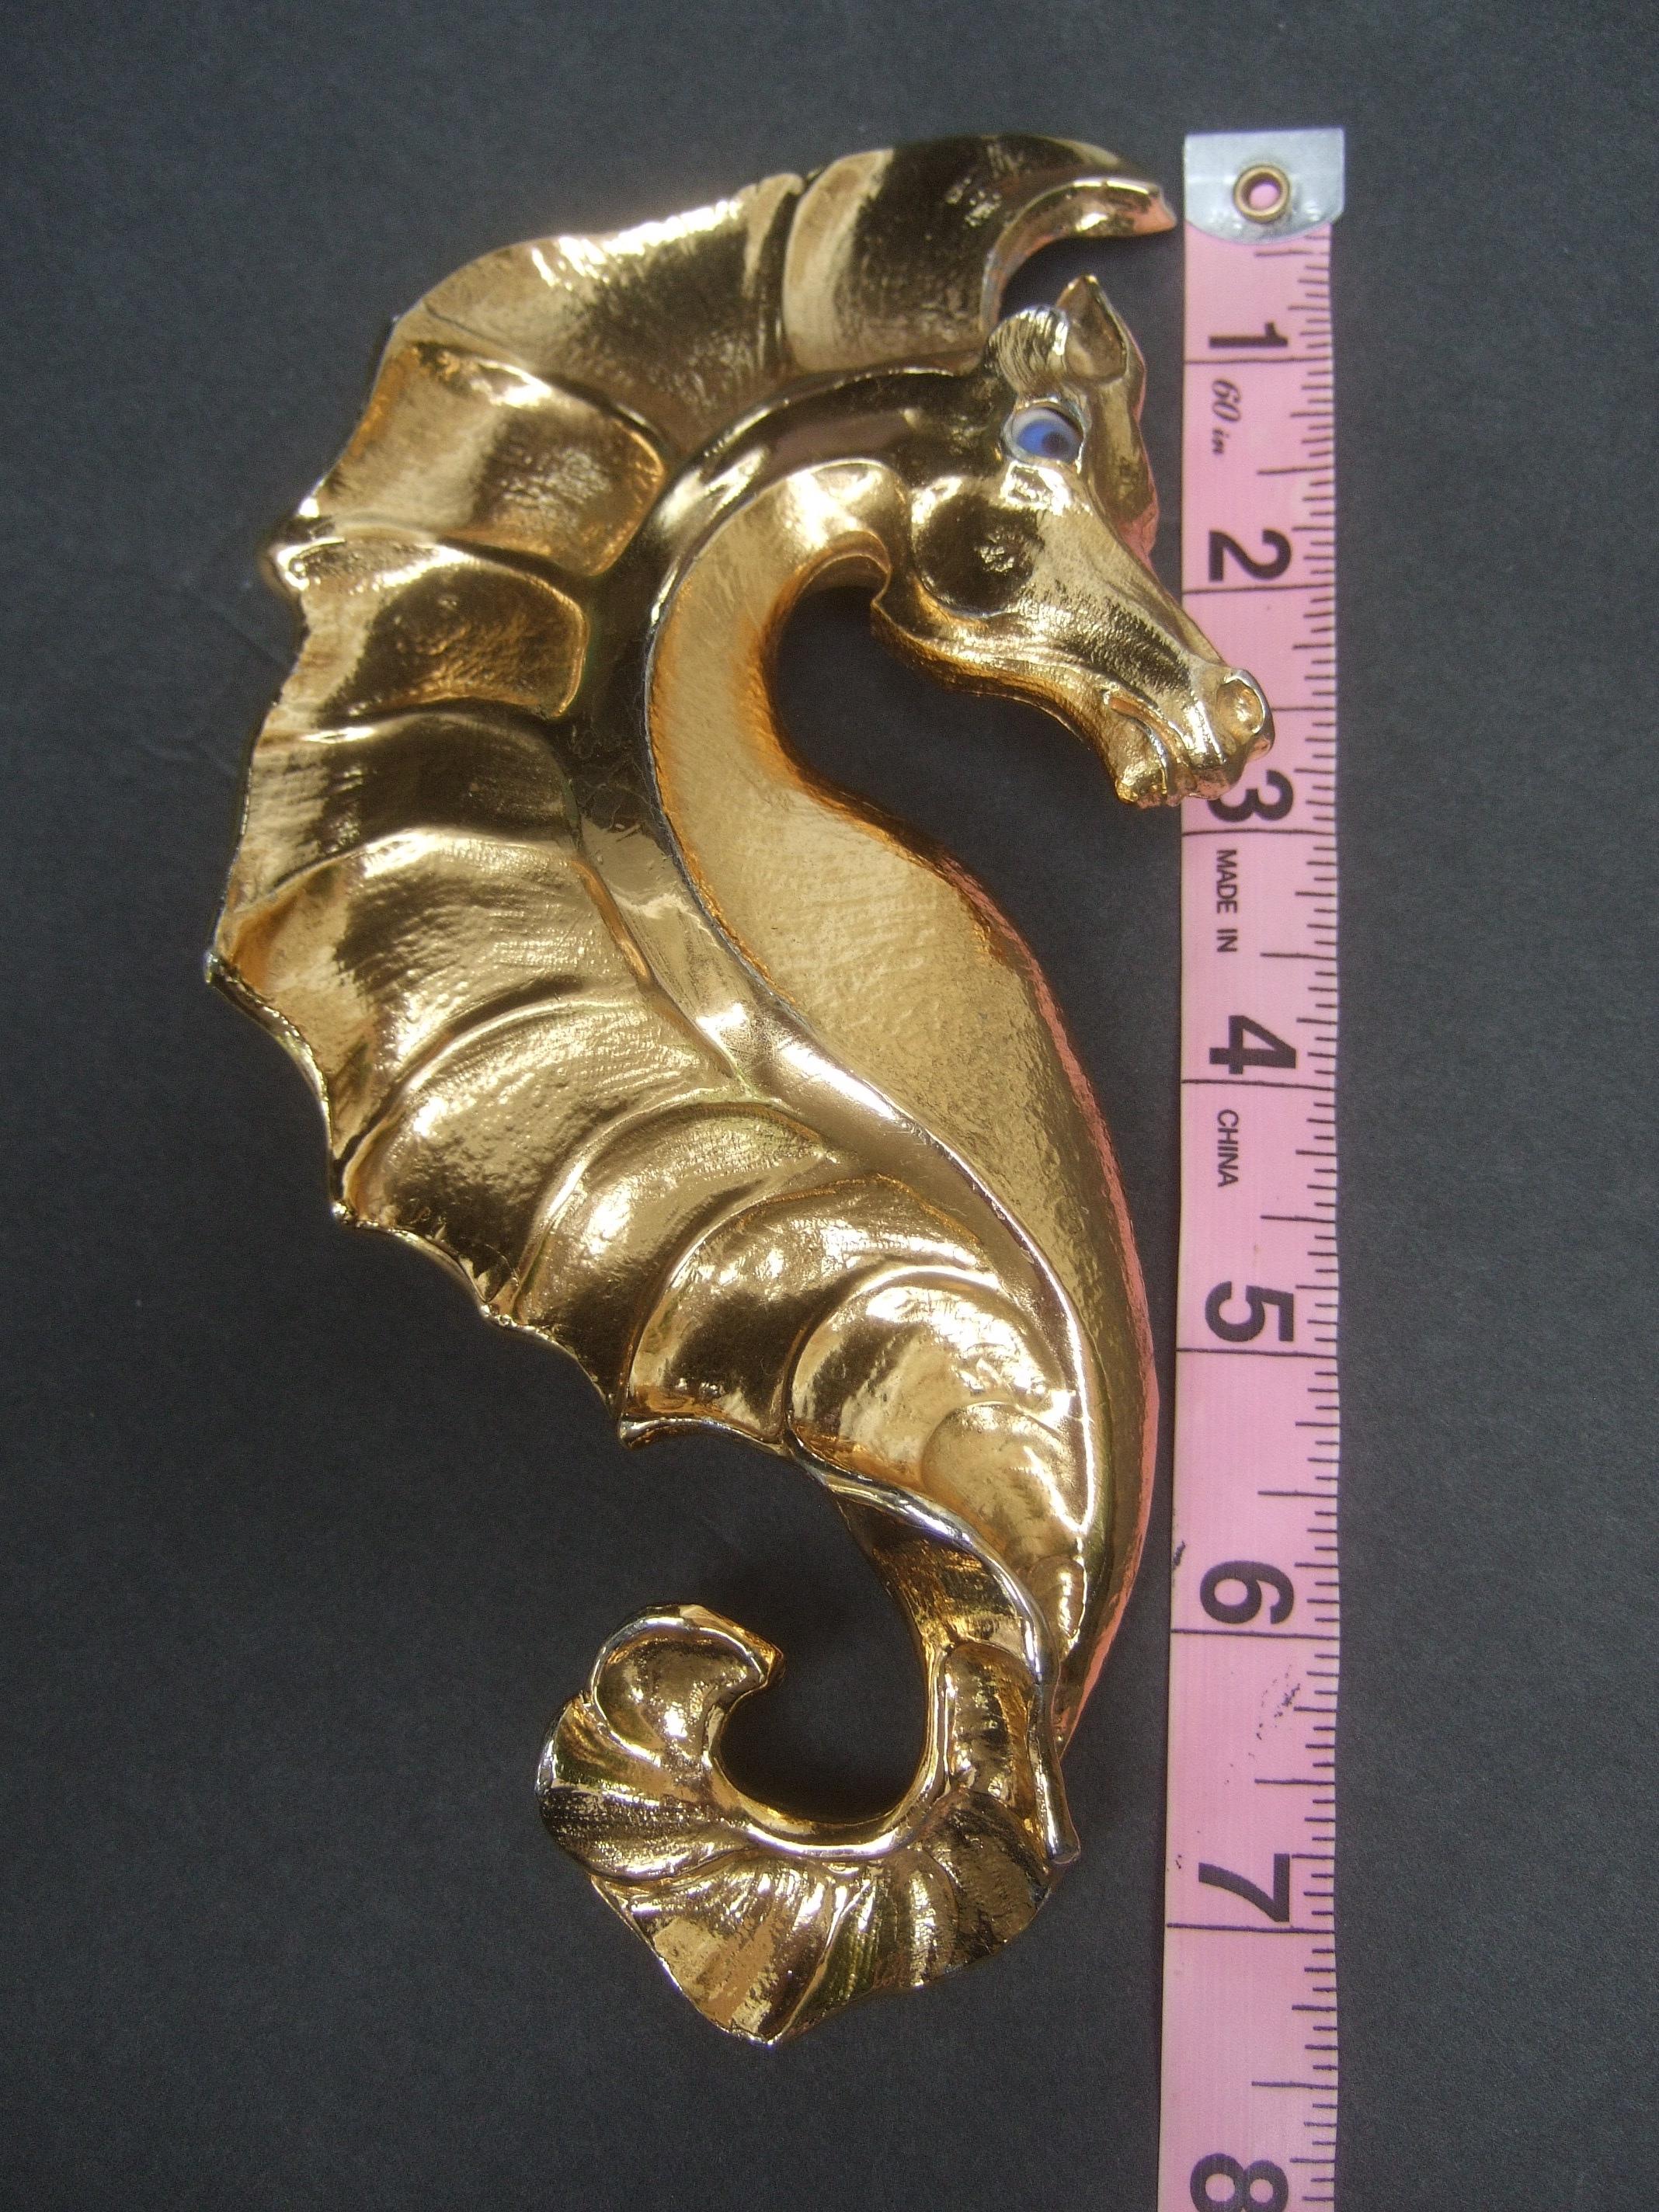 Christopher Ross Rare Massive 24k Gold Plated Seahorse Belt Buckle c 1980s For Sale 3